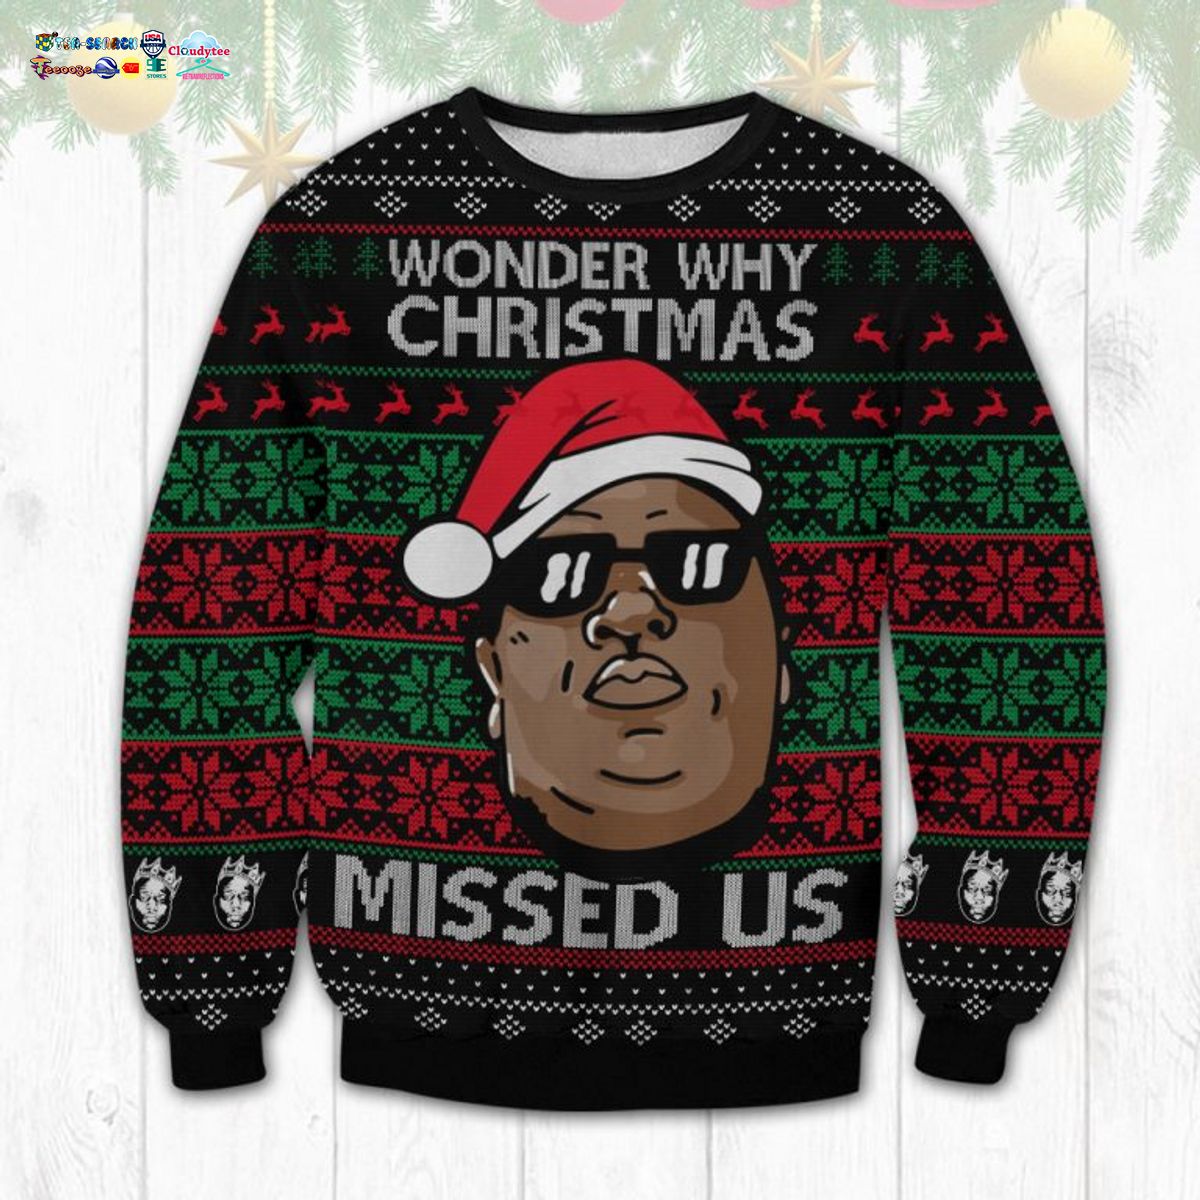 The Notorious B.I.G. Wonder Why Christmas Missed Us Ugly Christmas Sweater